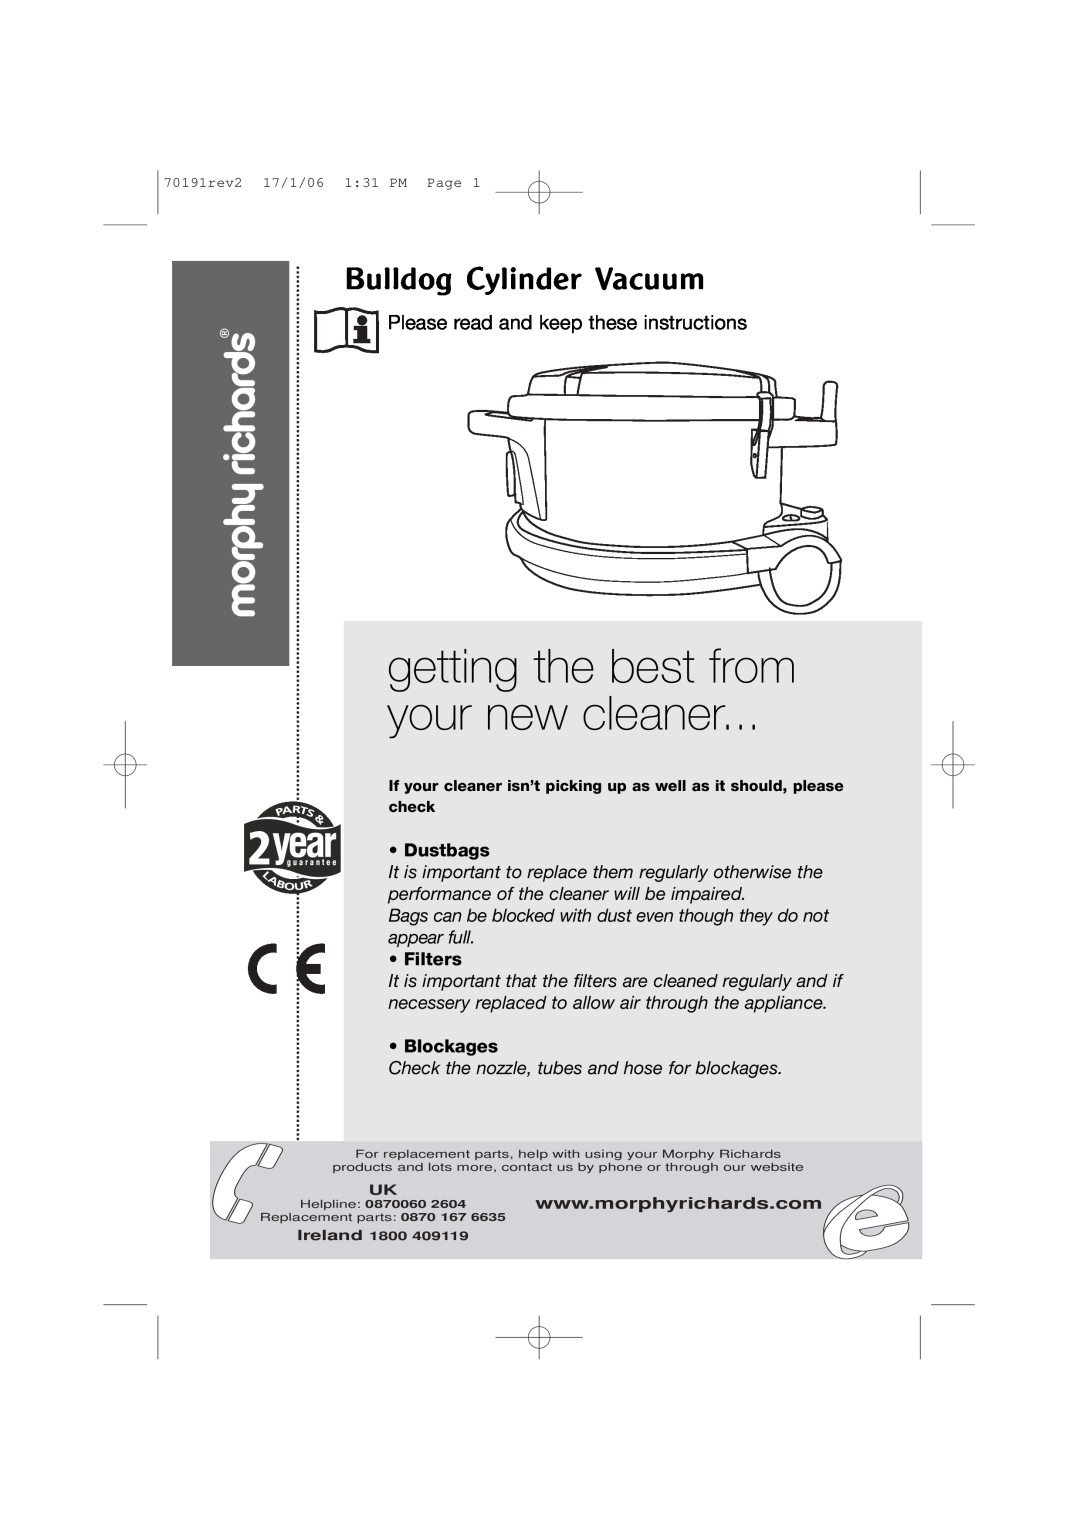 Morphy Richards 70191REV2 manual getting the best from your new cleaner, Bulldog Cylinder Vacuum, Dustbags, Filters 